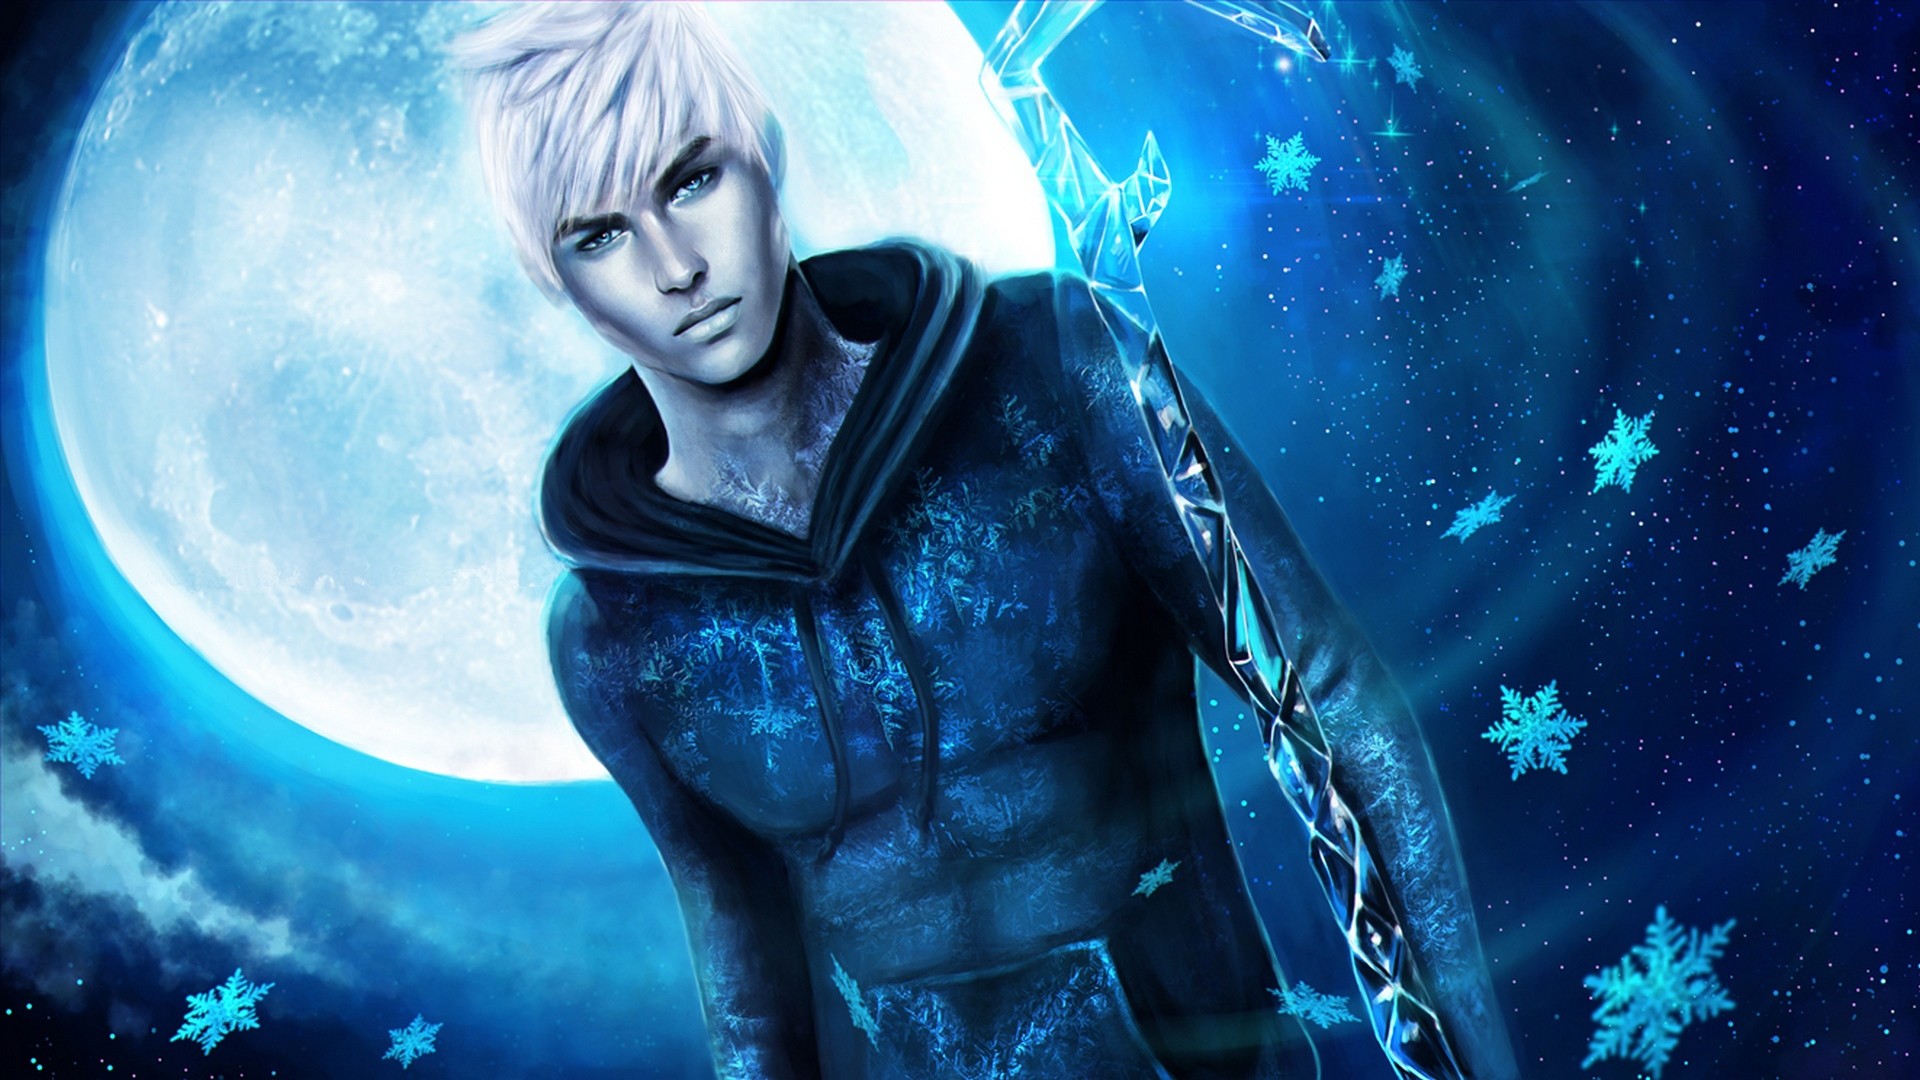 jack frost wallpaper,cg artwork,sky,space,illustration,fictional character